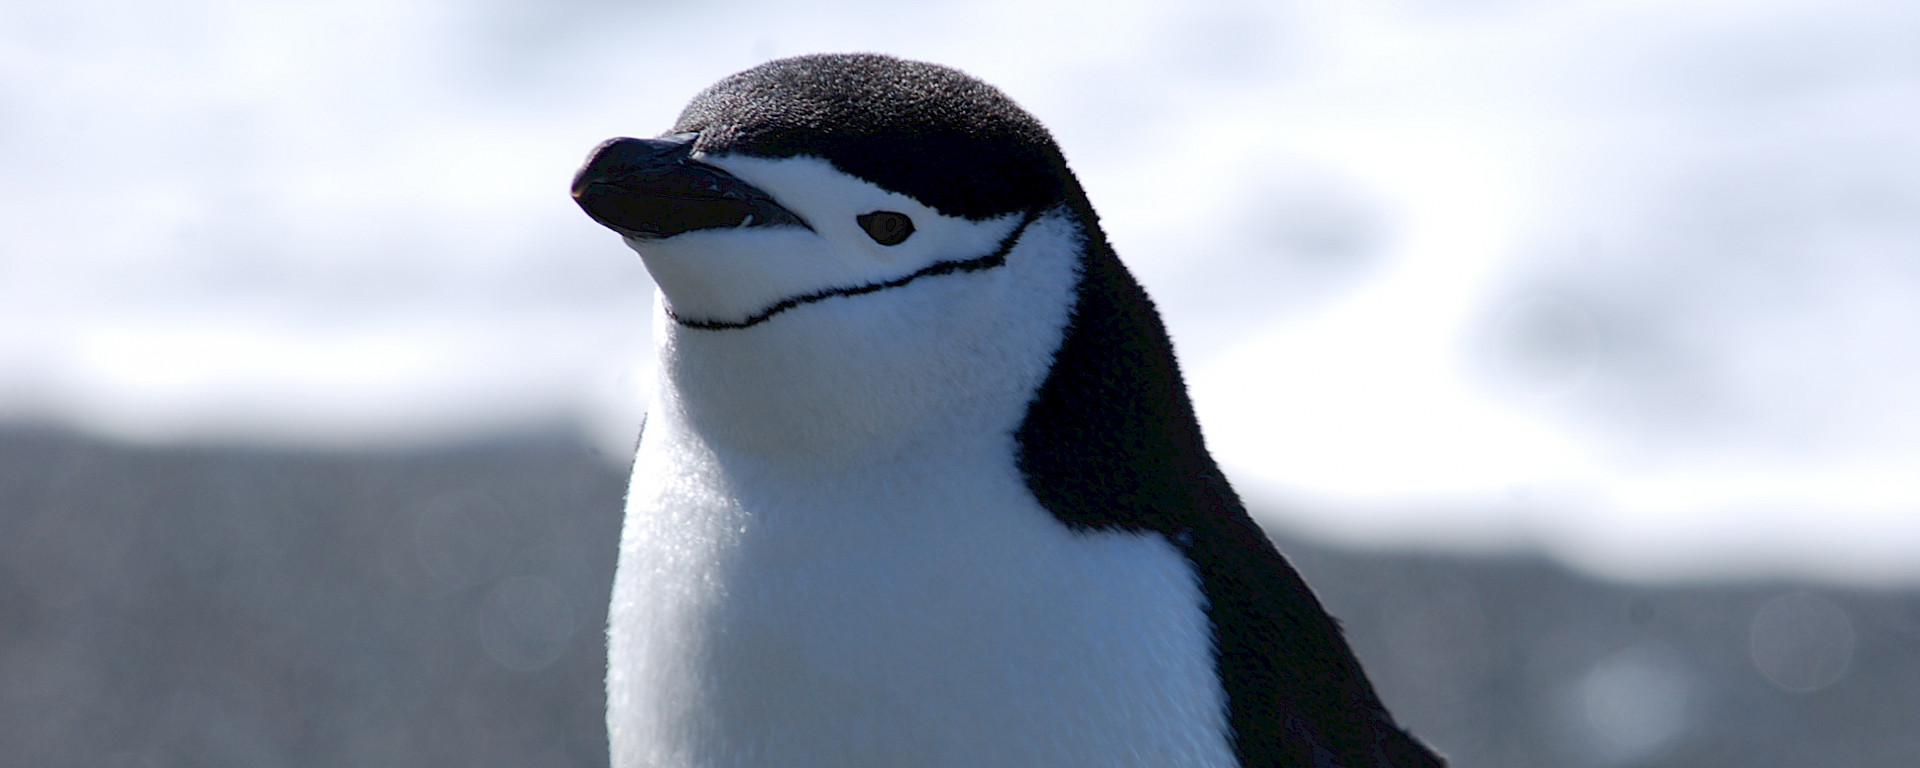 Close up of chinstrap penguin, showing its top half.